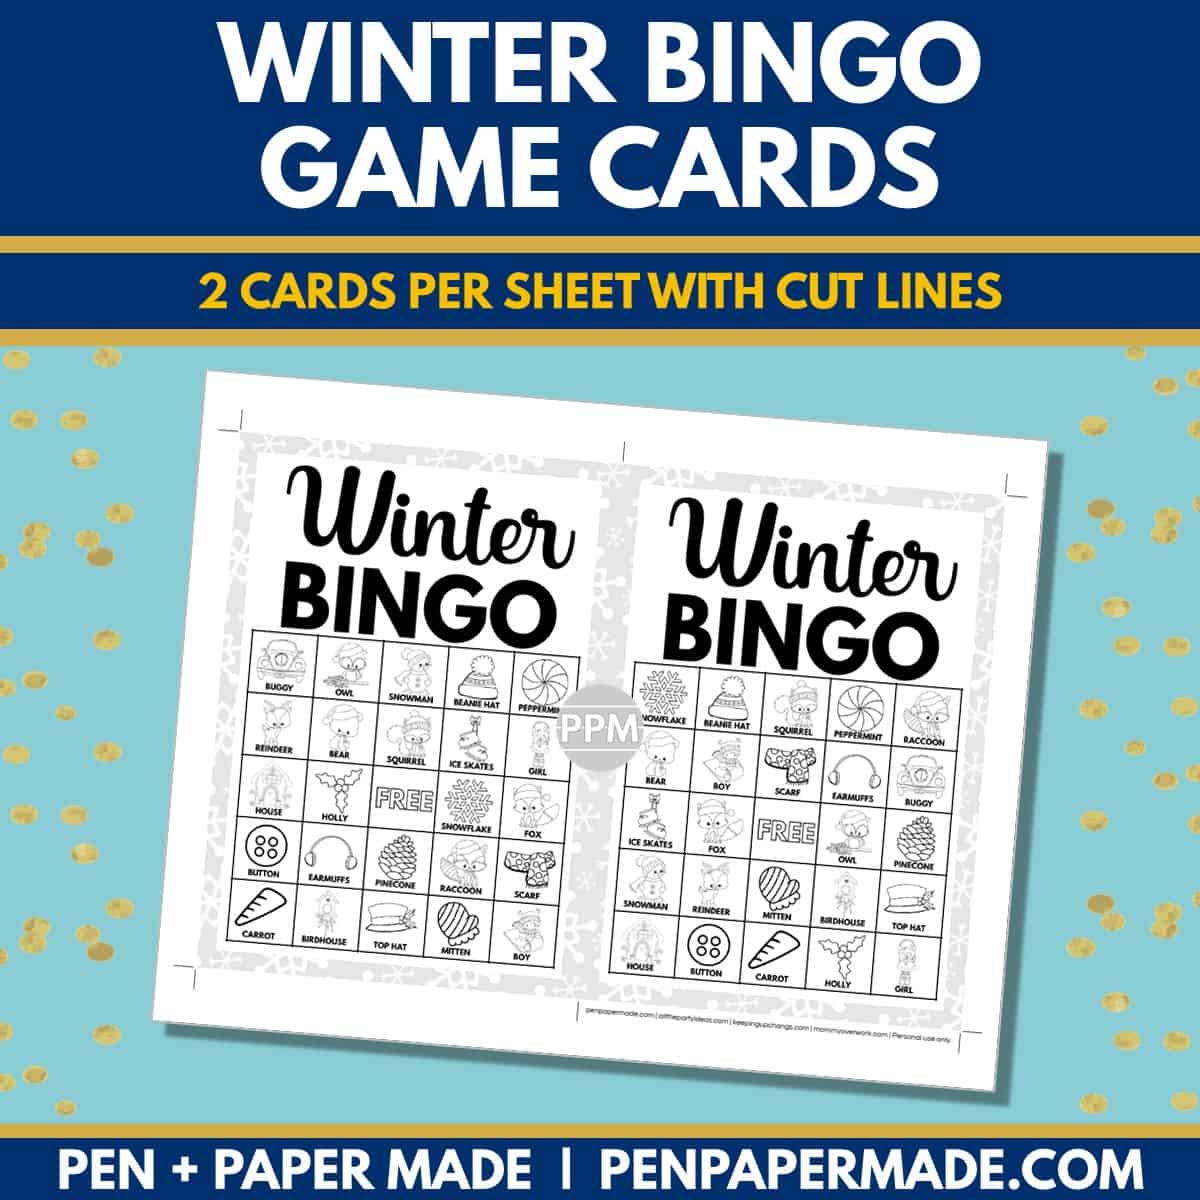 winter bingo card 5x5 5x7 game boards with black white images and text words for coloring.